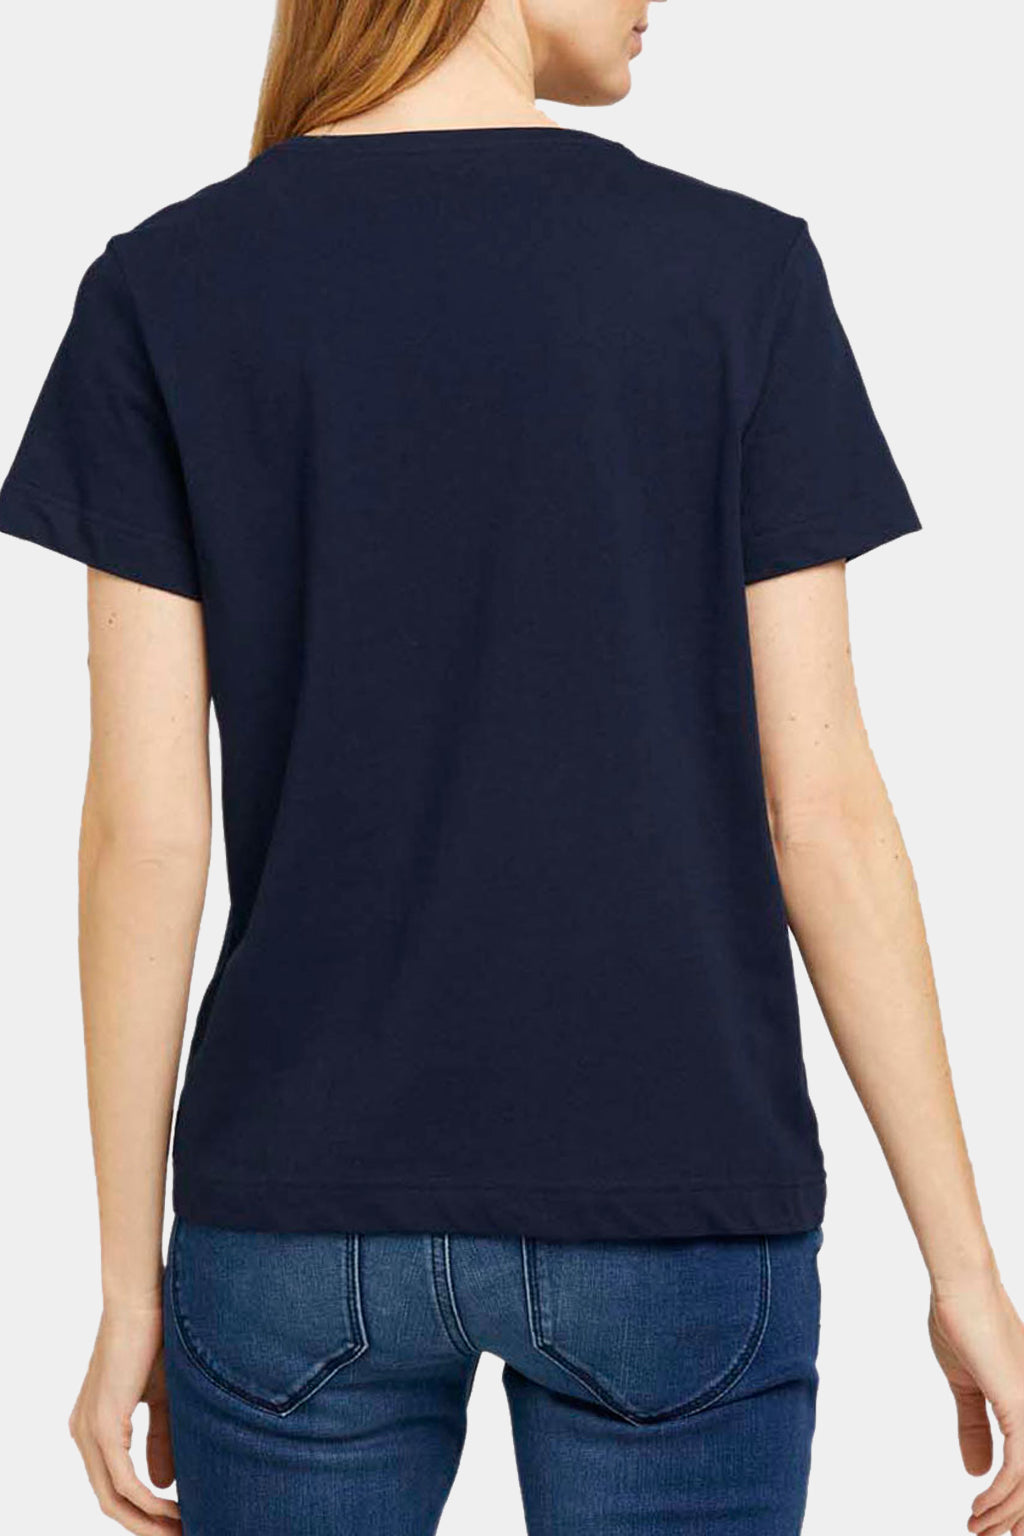 Tom Tailor - Embroidered T-Shirt, Organic Cotton